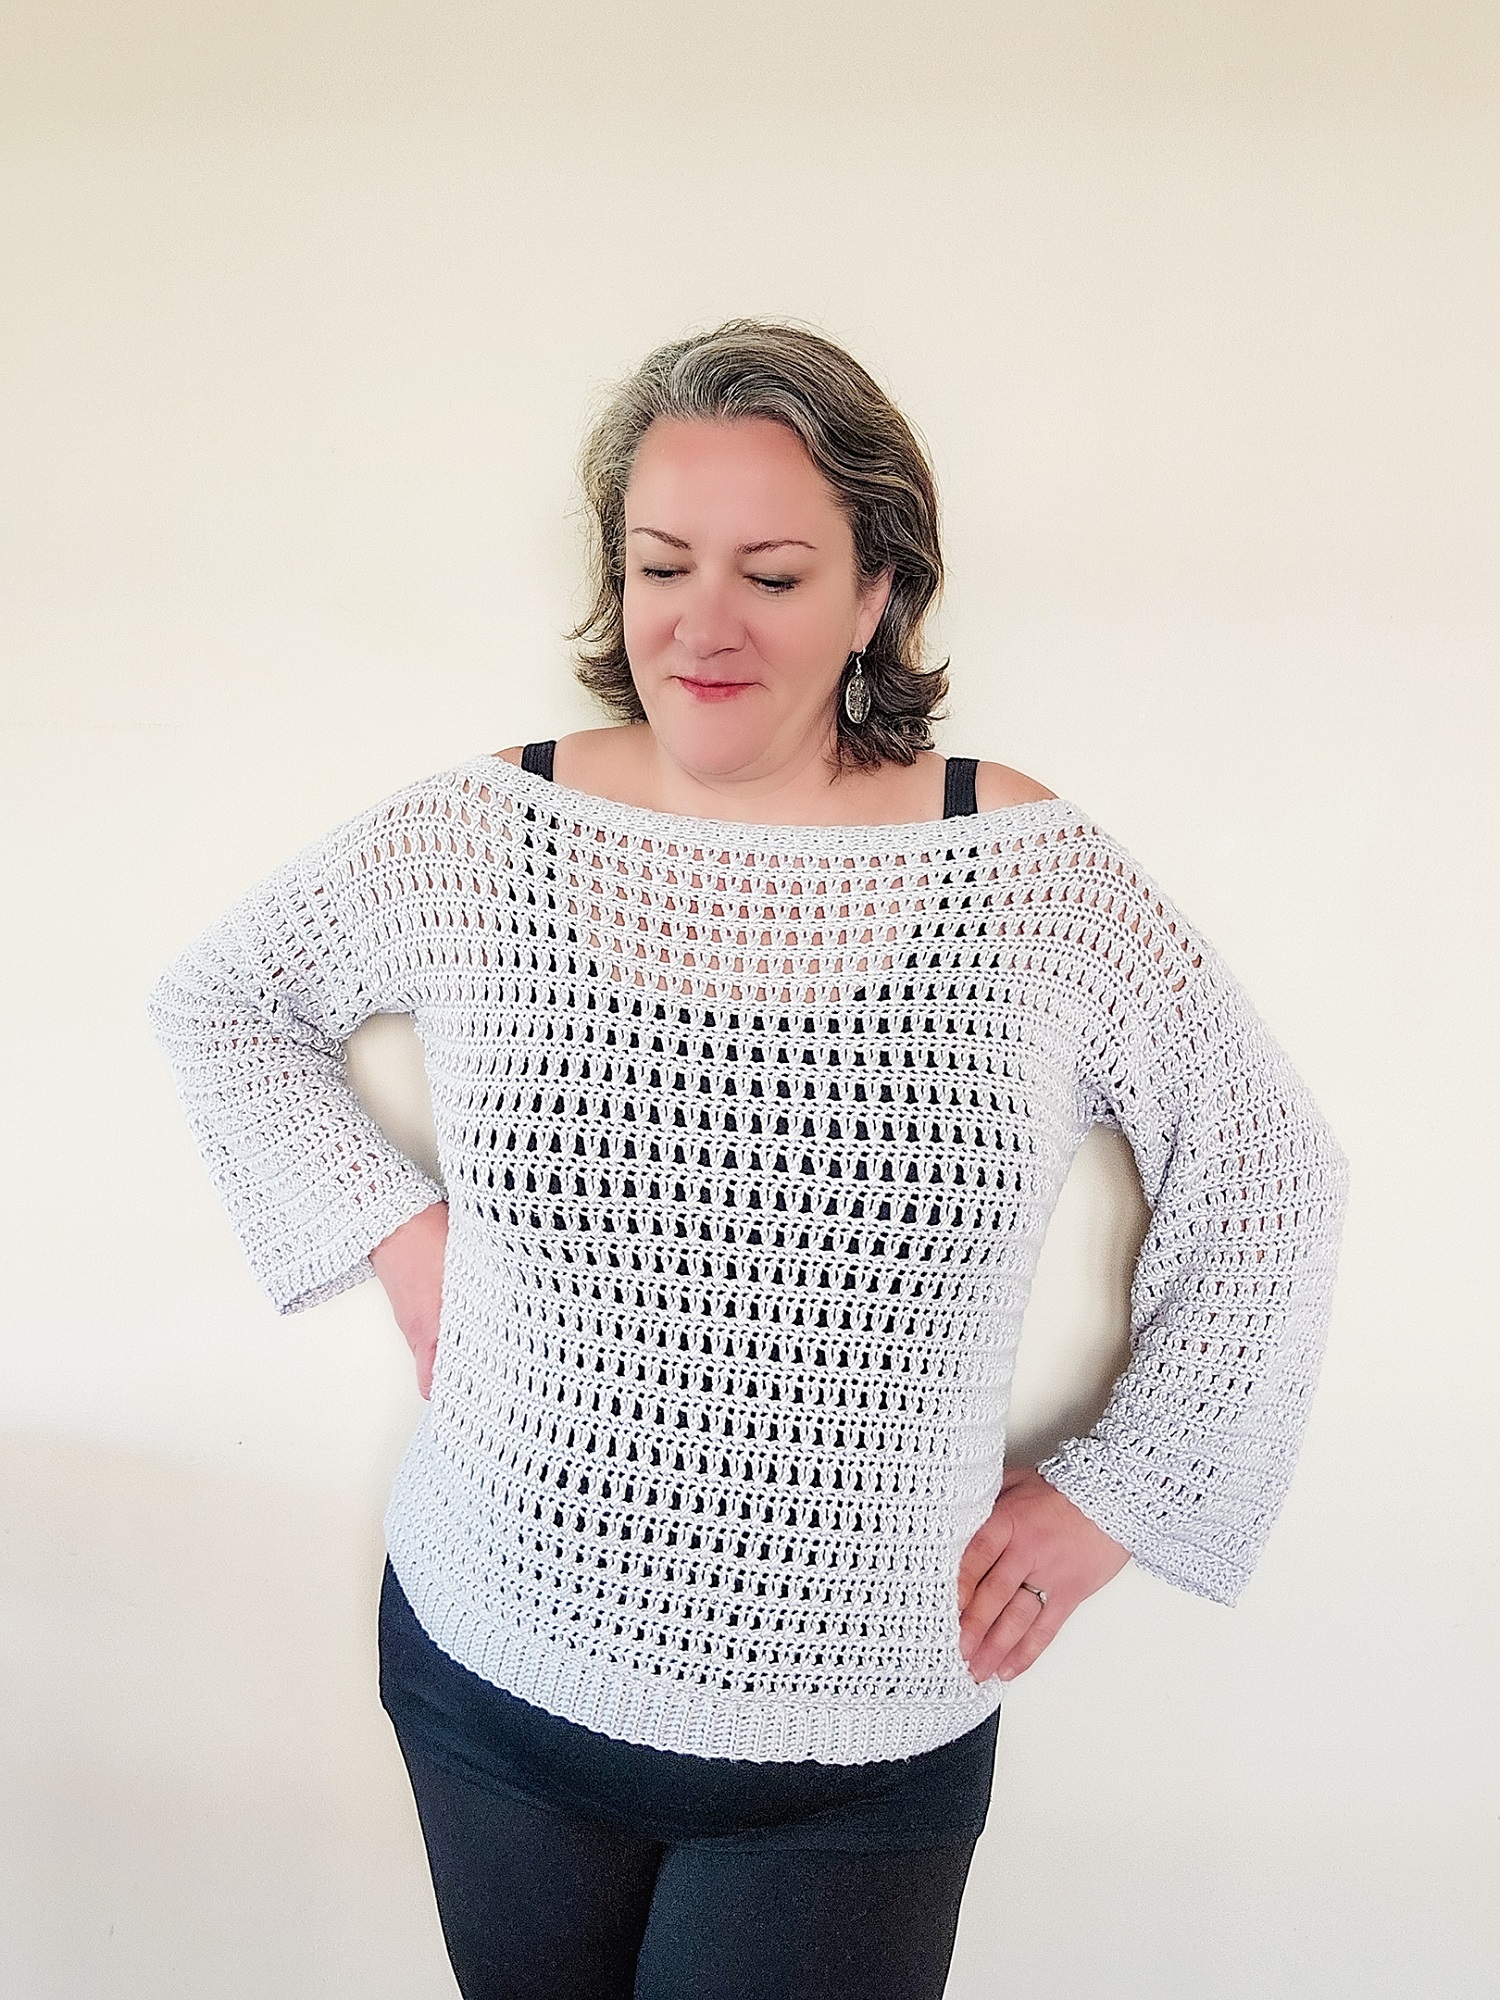 OFF THE SHOULDER CROCHET SWEATER - Free Pattern ⋆ lulostitchco.com